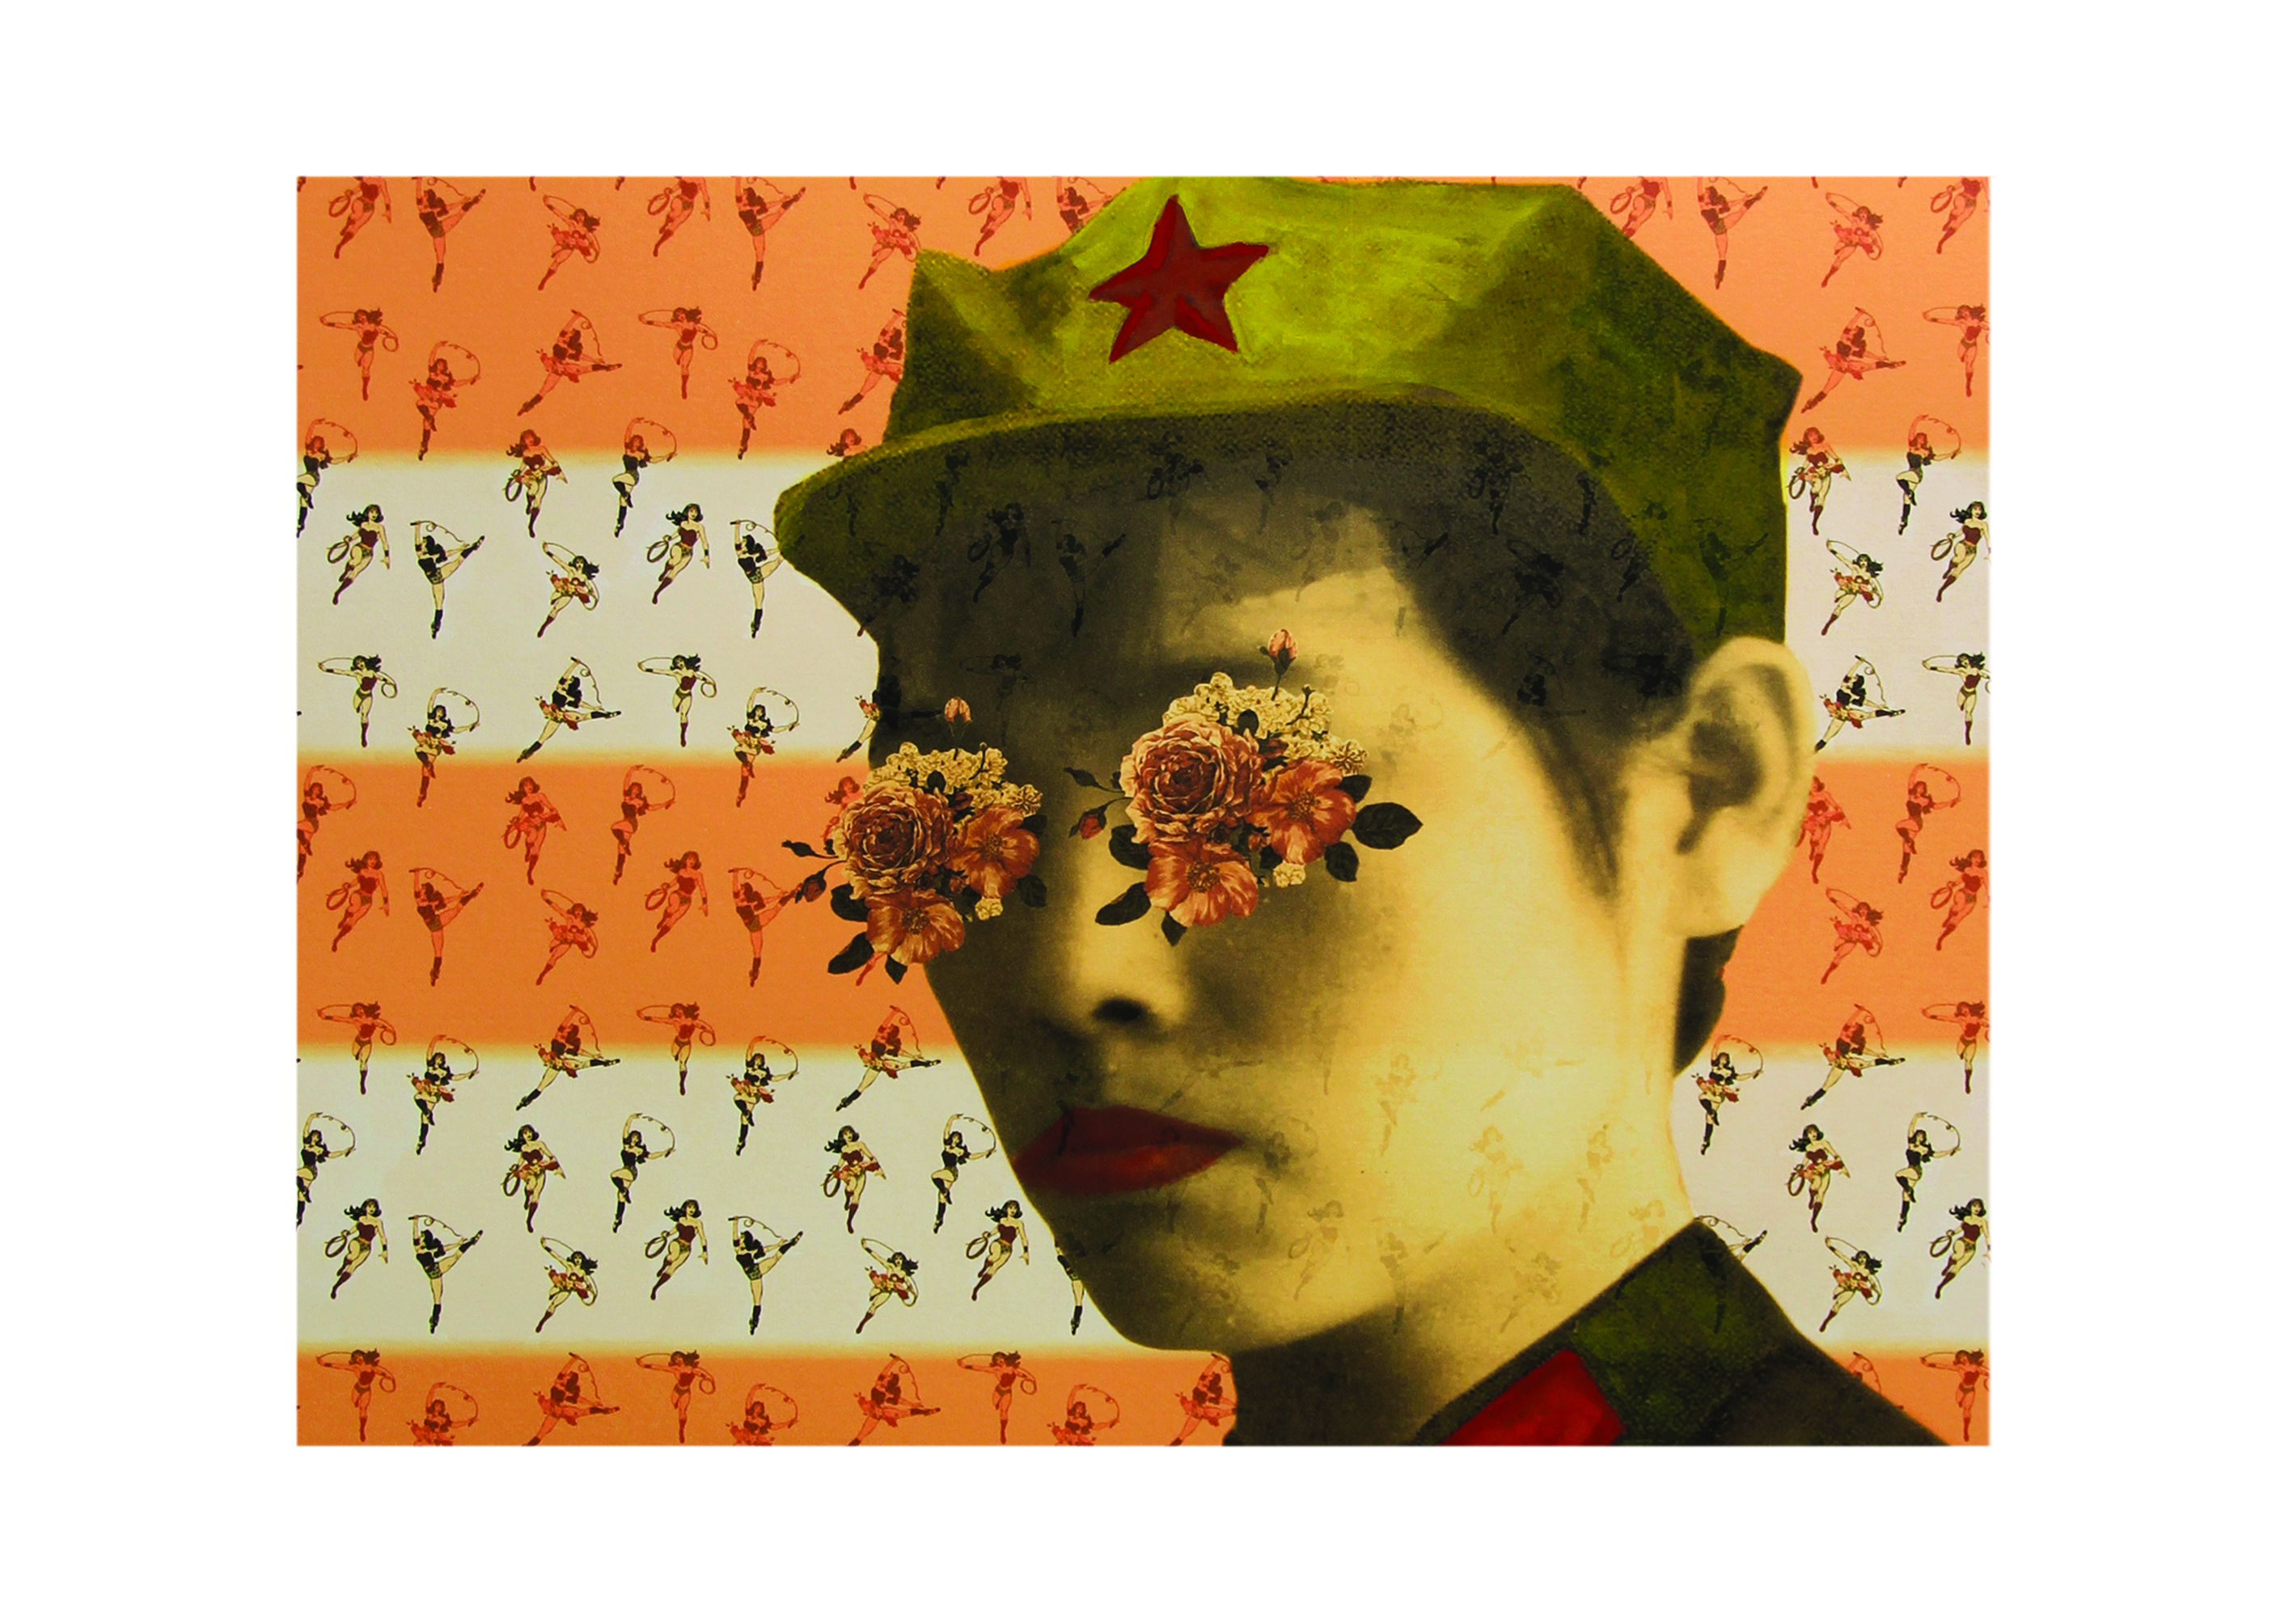 �Make art not war � Test pilot� by Ying Huang, Etching and screen printing on steel of a person with short hair with bunches of pink and white flowers in their eyes and red lips, whirring a green army cap with a red star, superimposed against a background of  wonder woman characters.